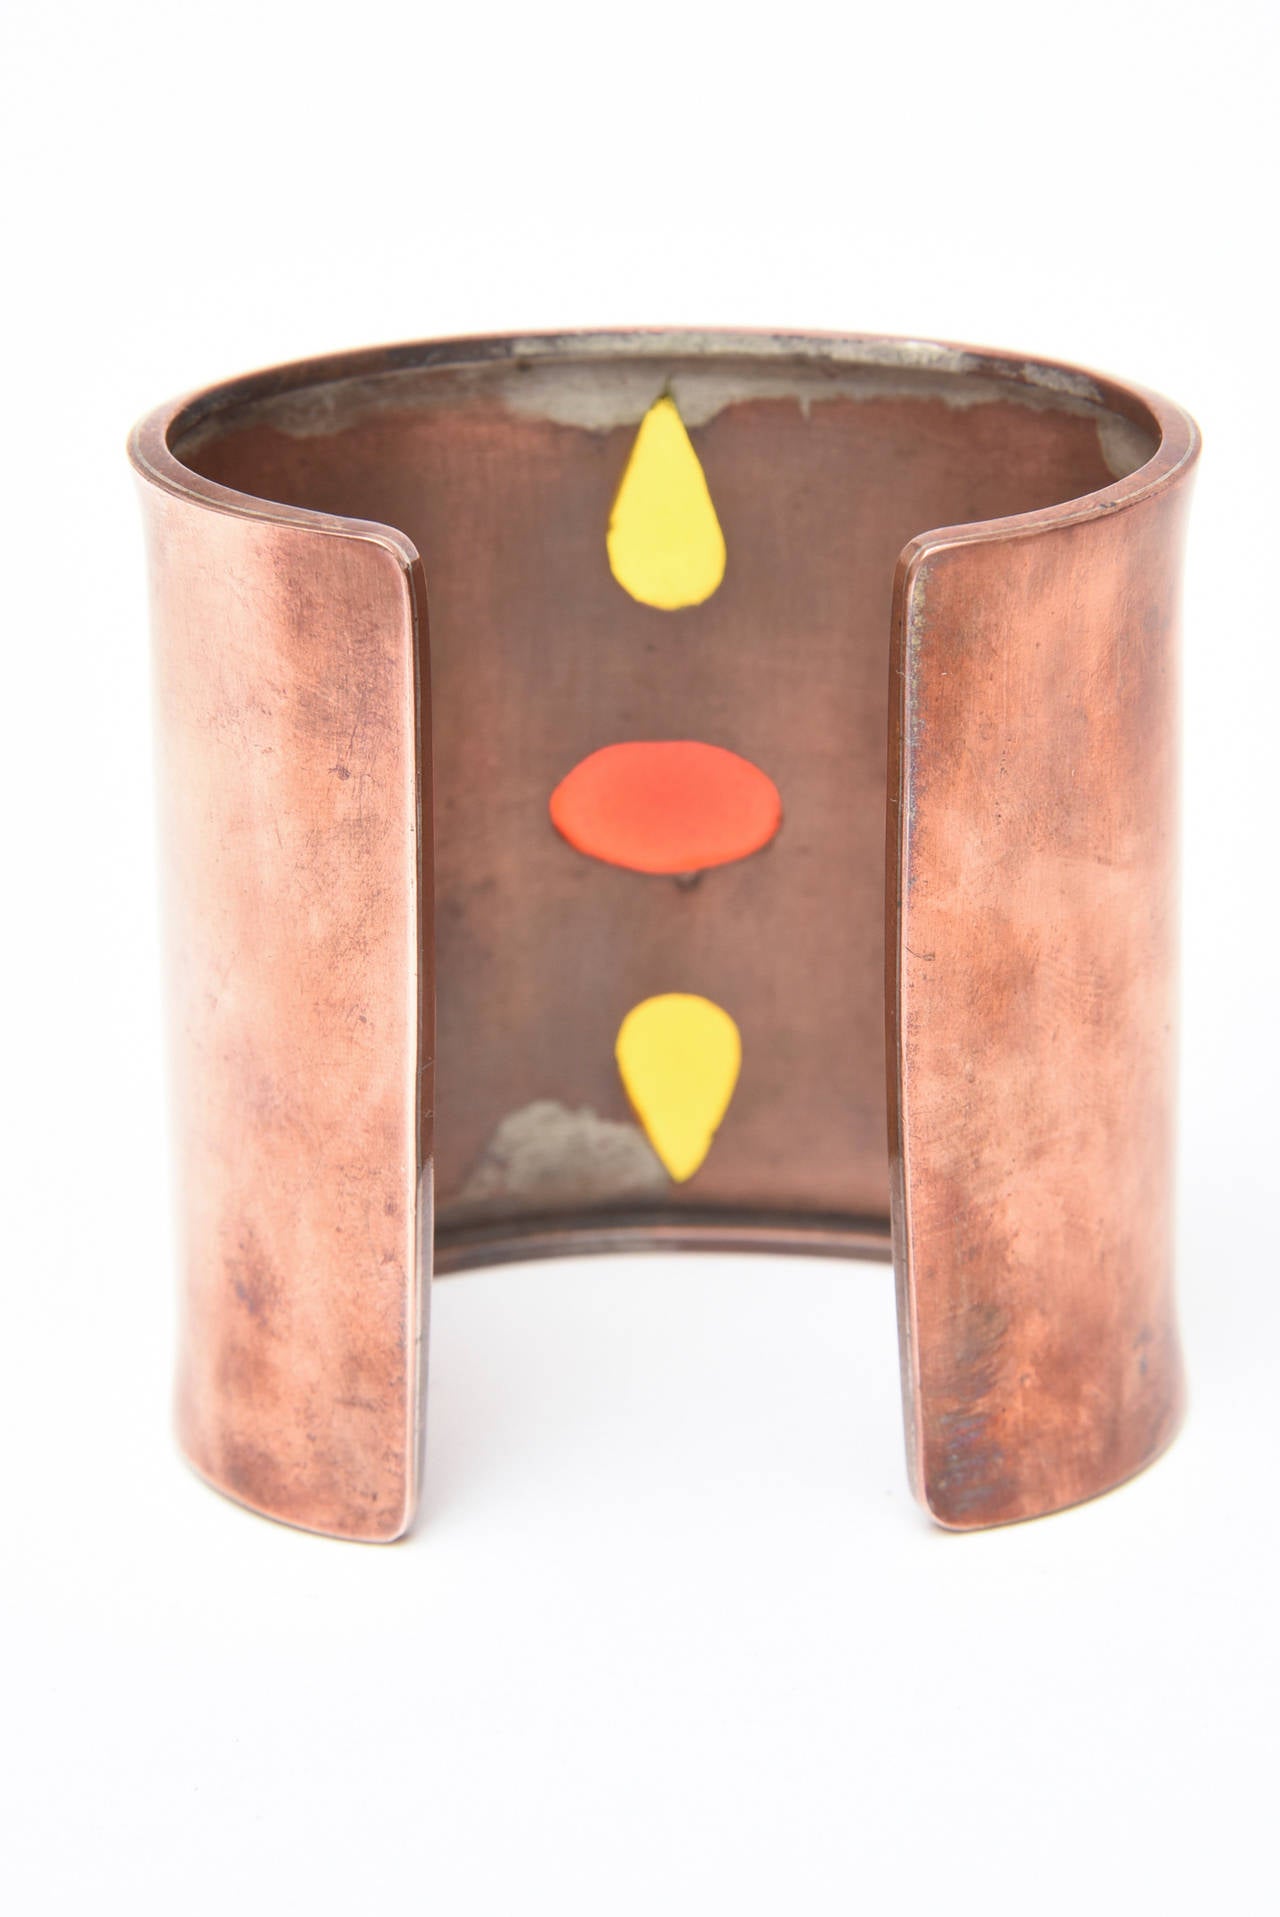 Ball Cut Copper, Red & Yellow Amber Glass Stones Cuff Bracelet Vintage One Of A Kind For Sale